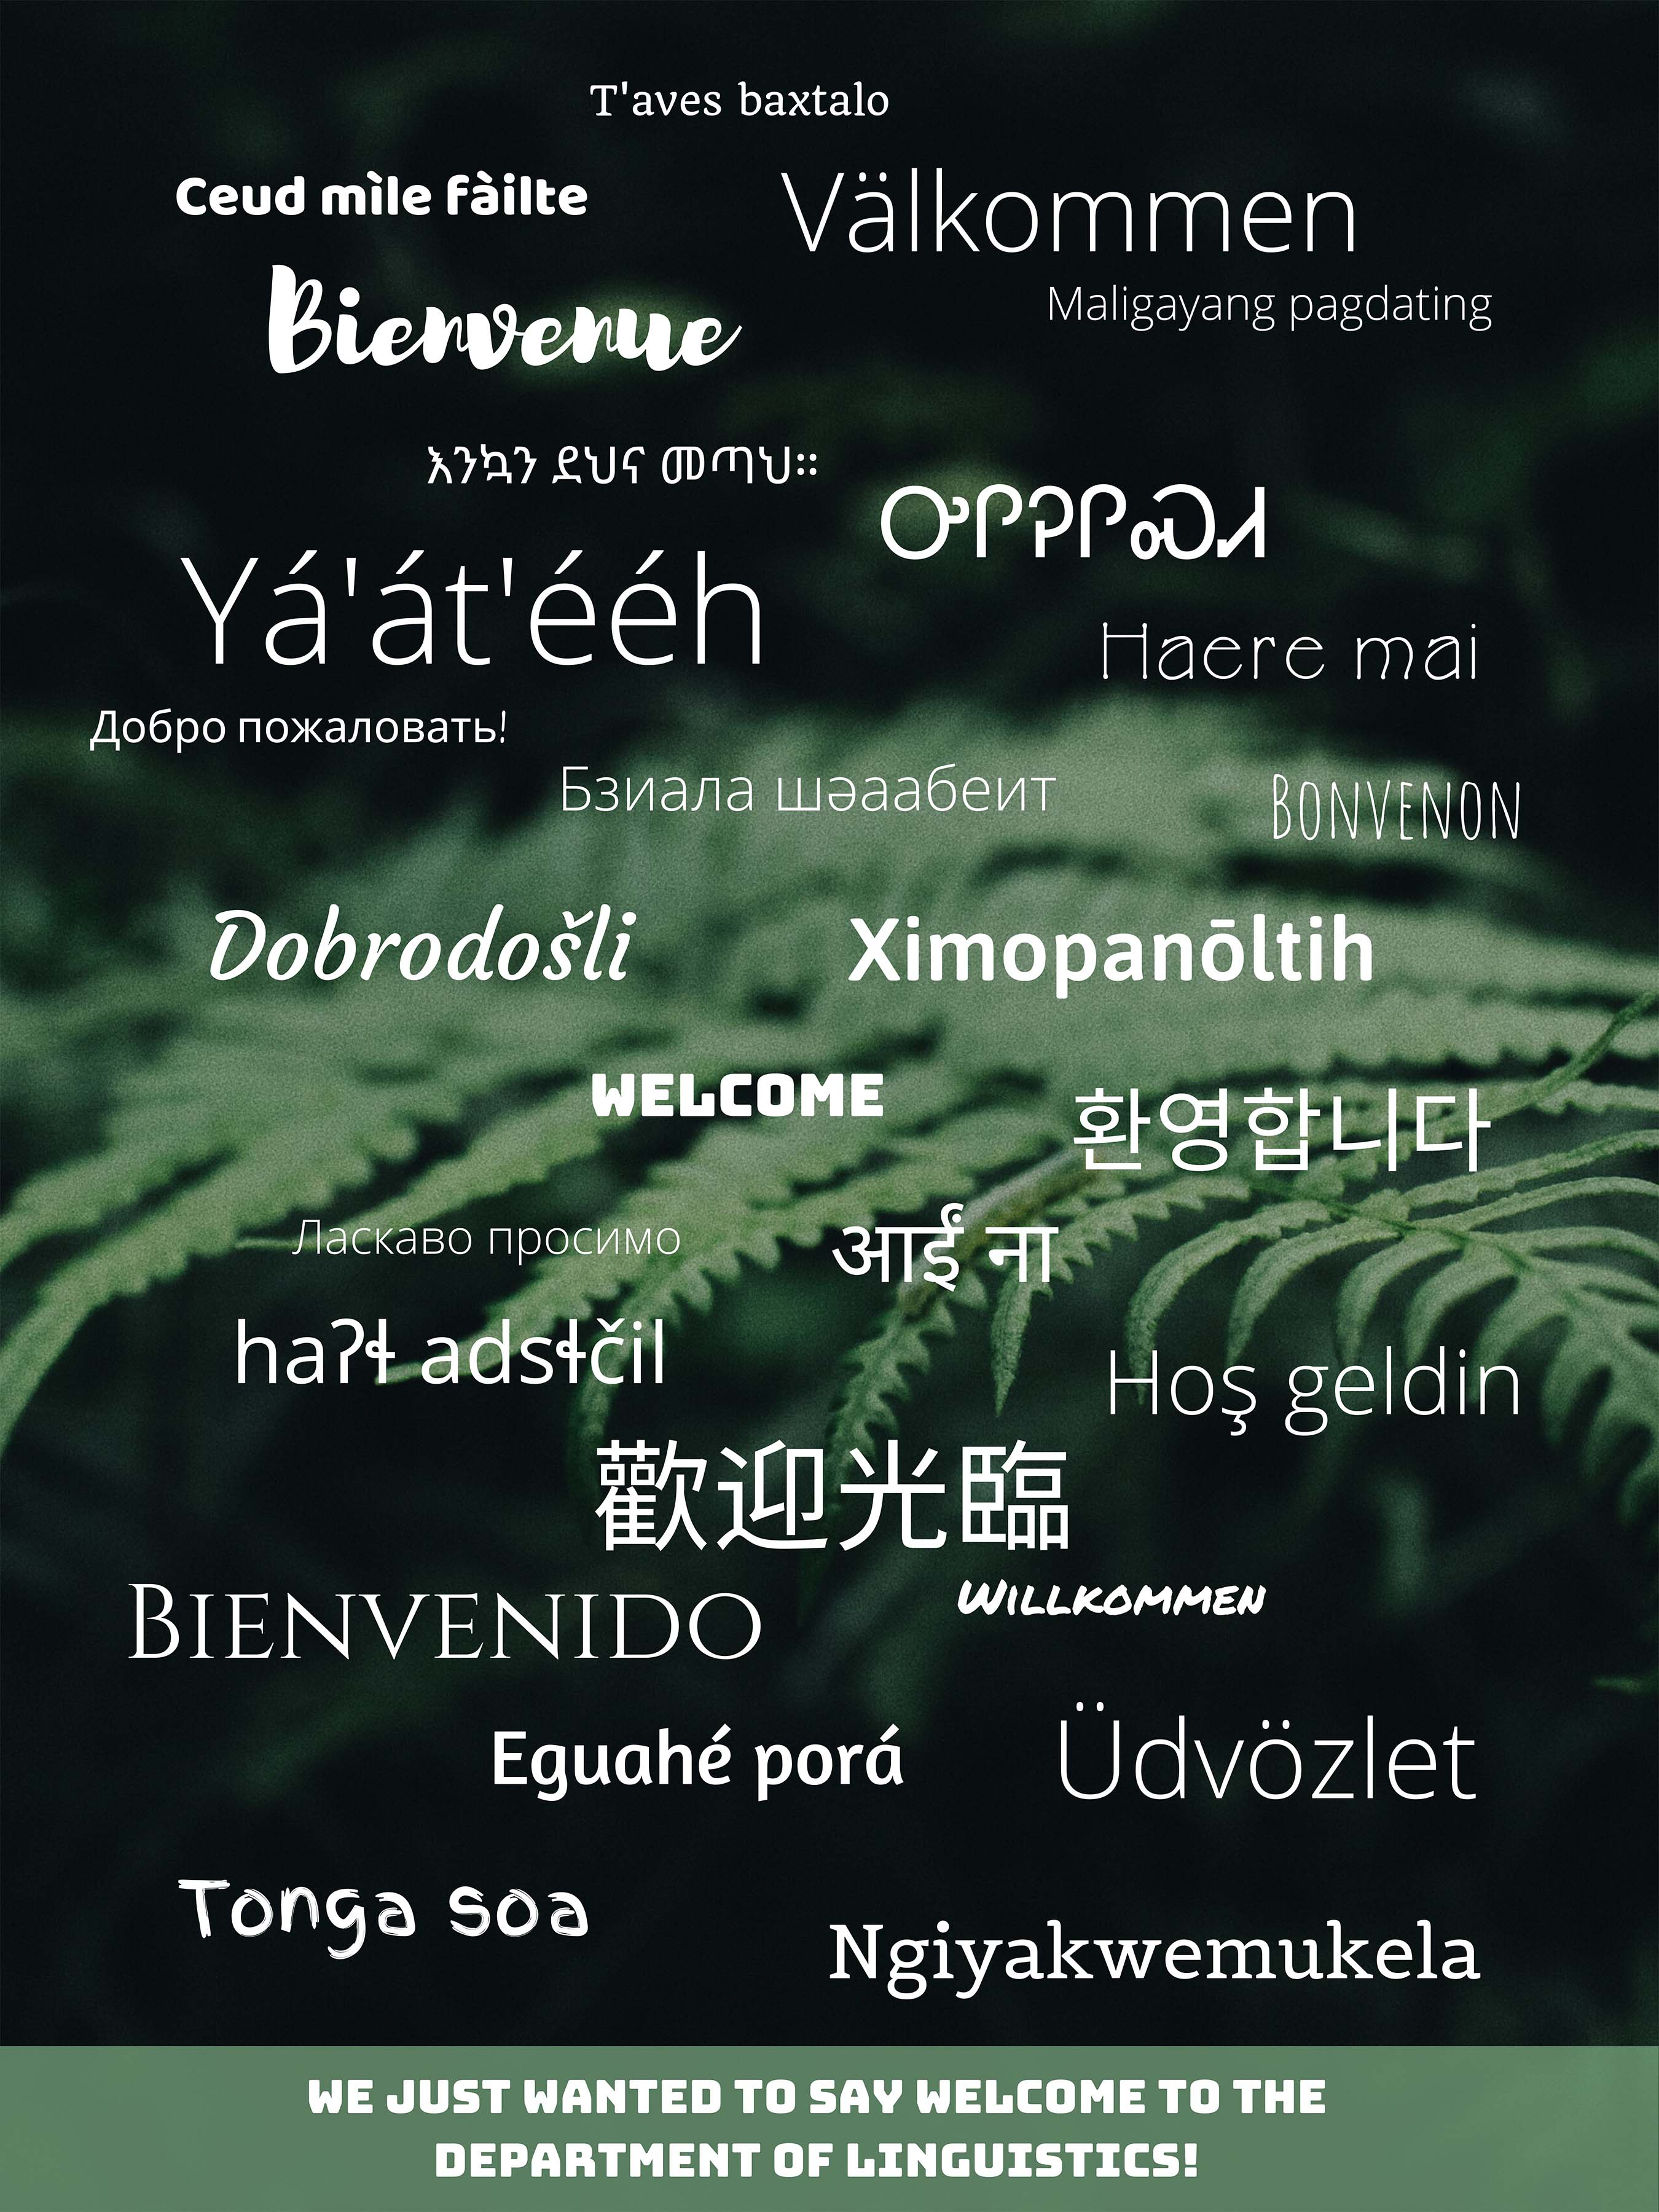 "Welcome" in several different languages. Click to see full description.